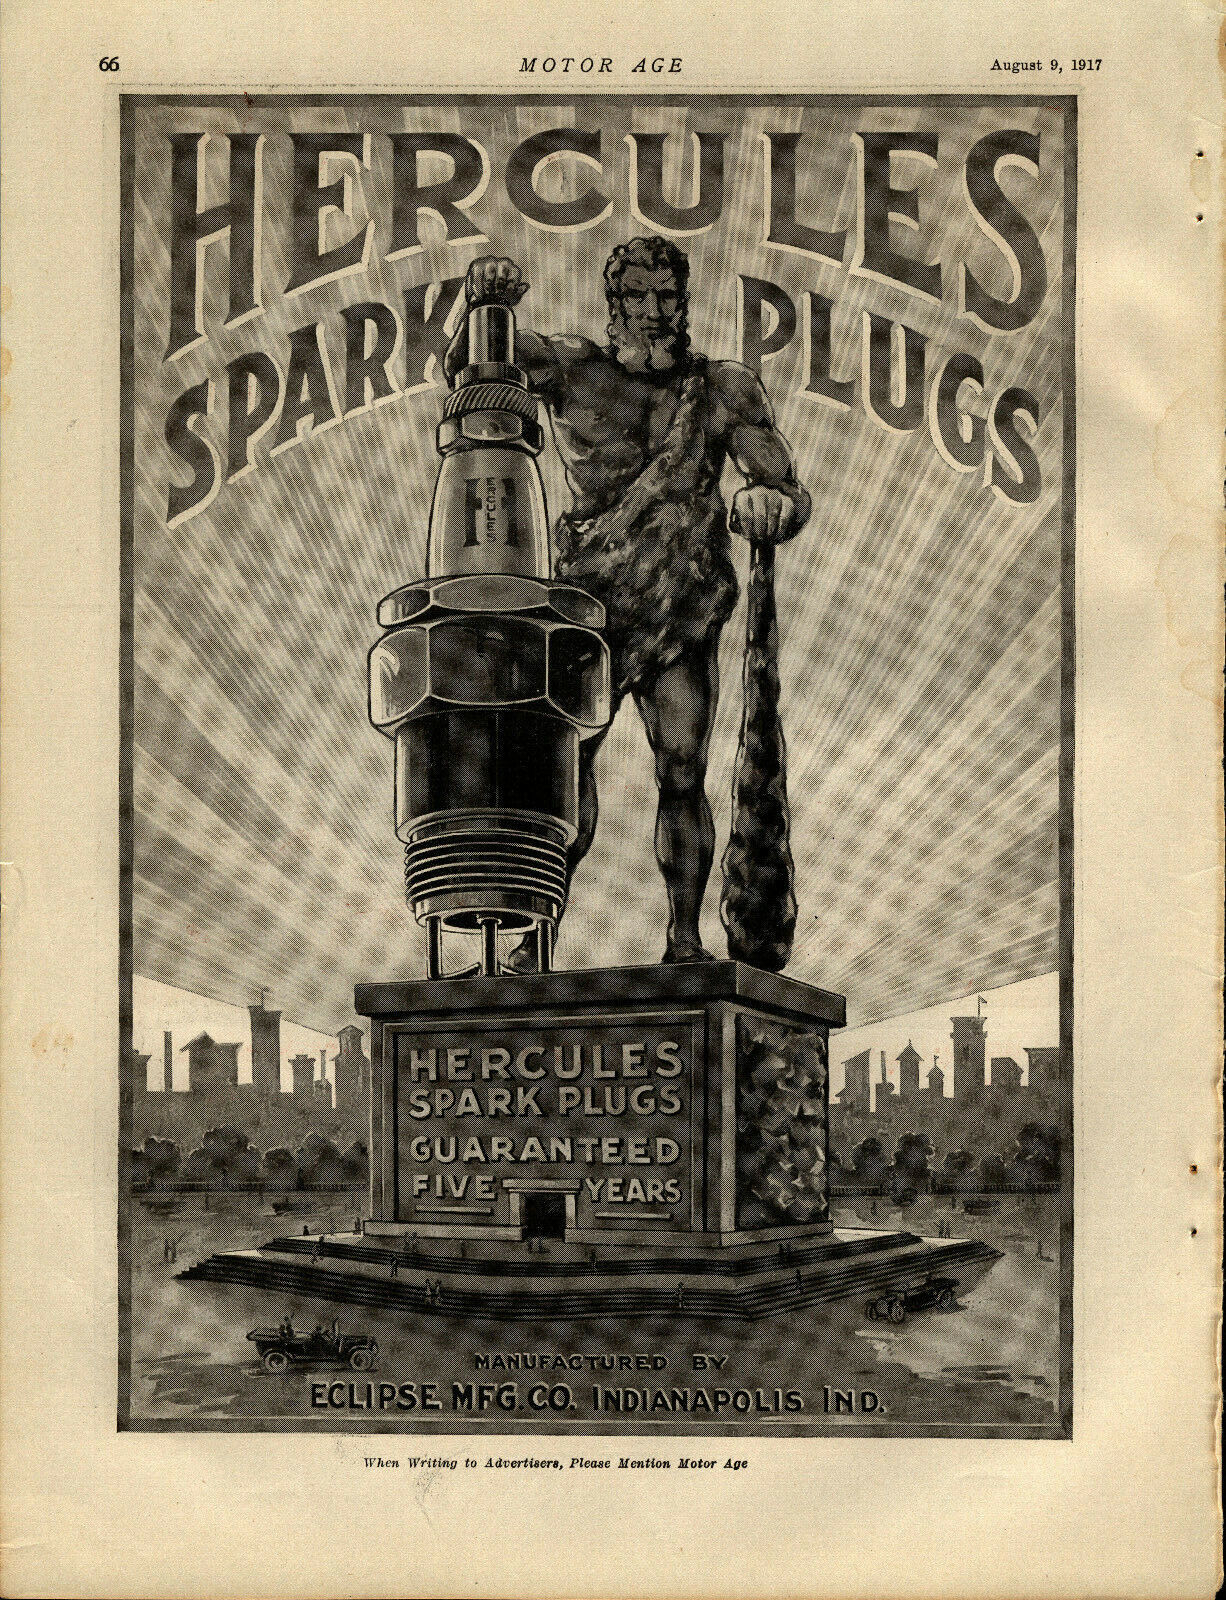 1917 Eclipse Mfg. Co.Ad: Hercules Spark Plugs - Indianapolis Indiana - Great Art